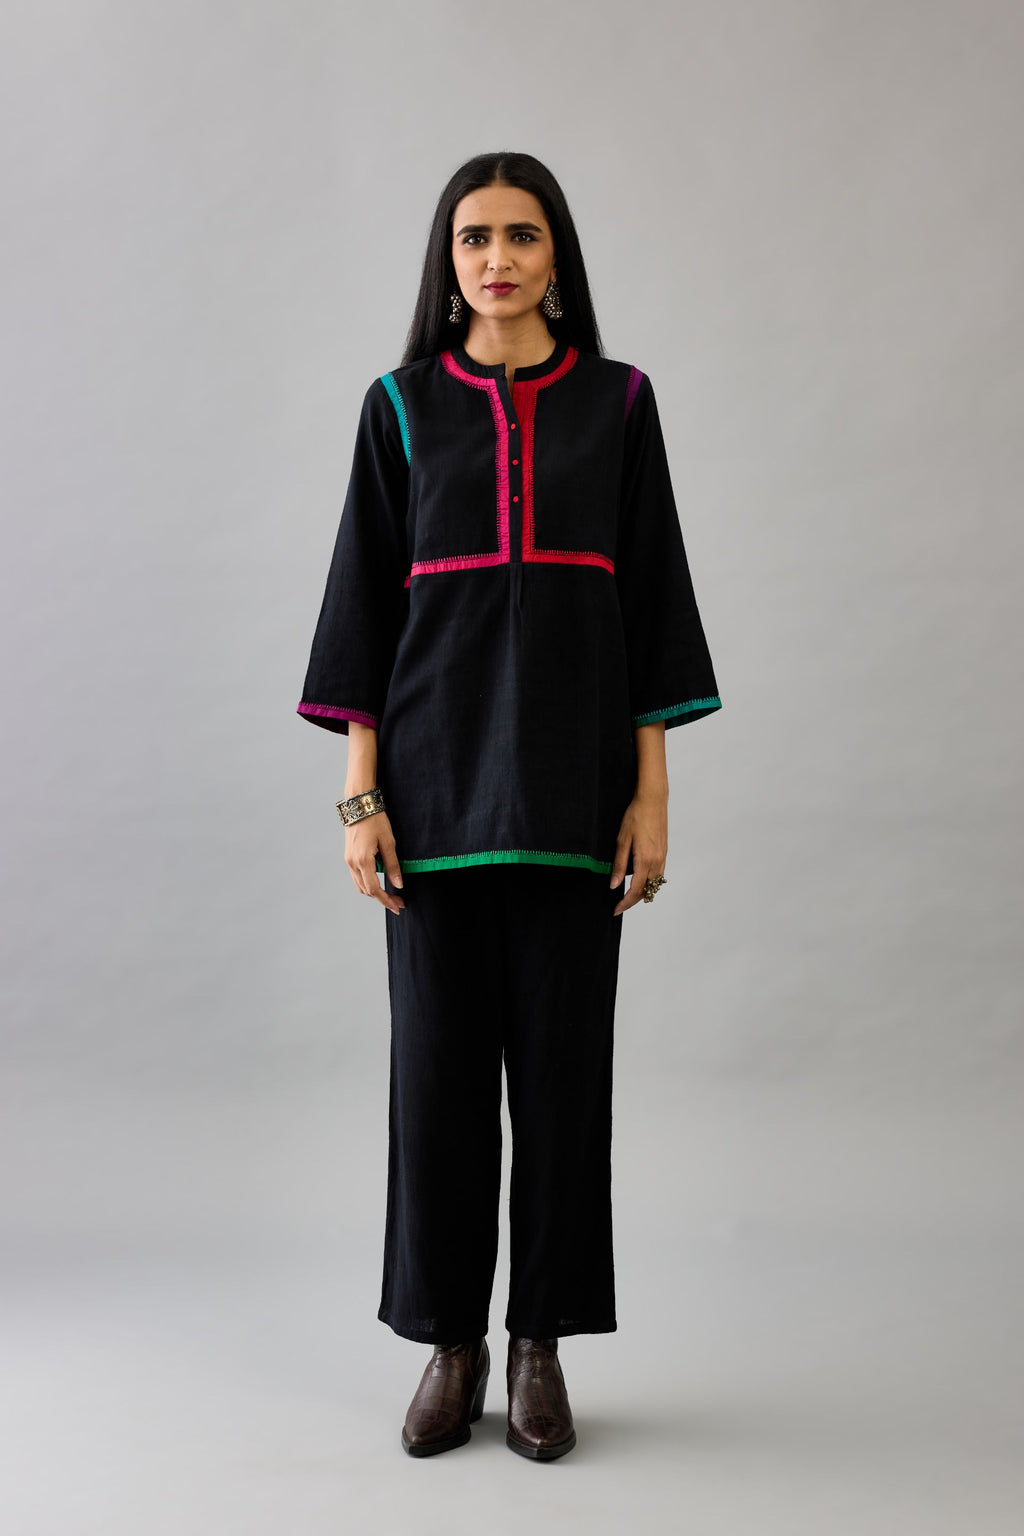 Black handloom cotton short top with multi colored silk facings and embroidery detail, paired with black handloom cotton straight pants.